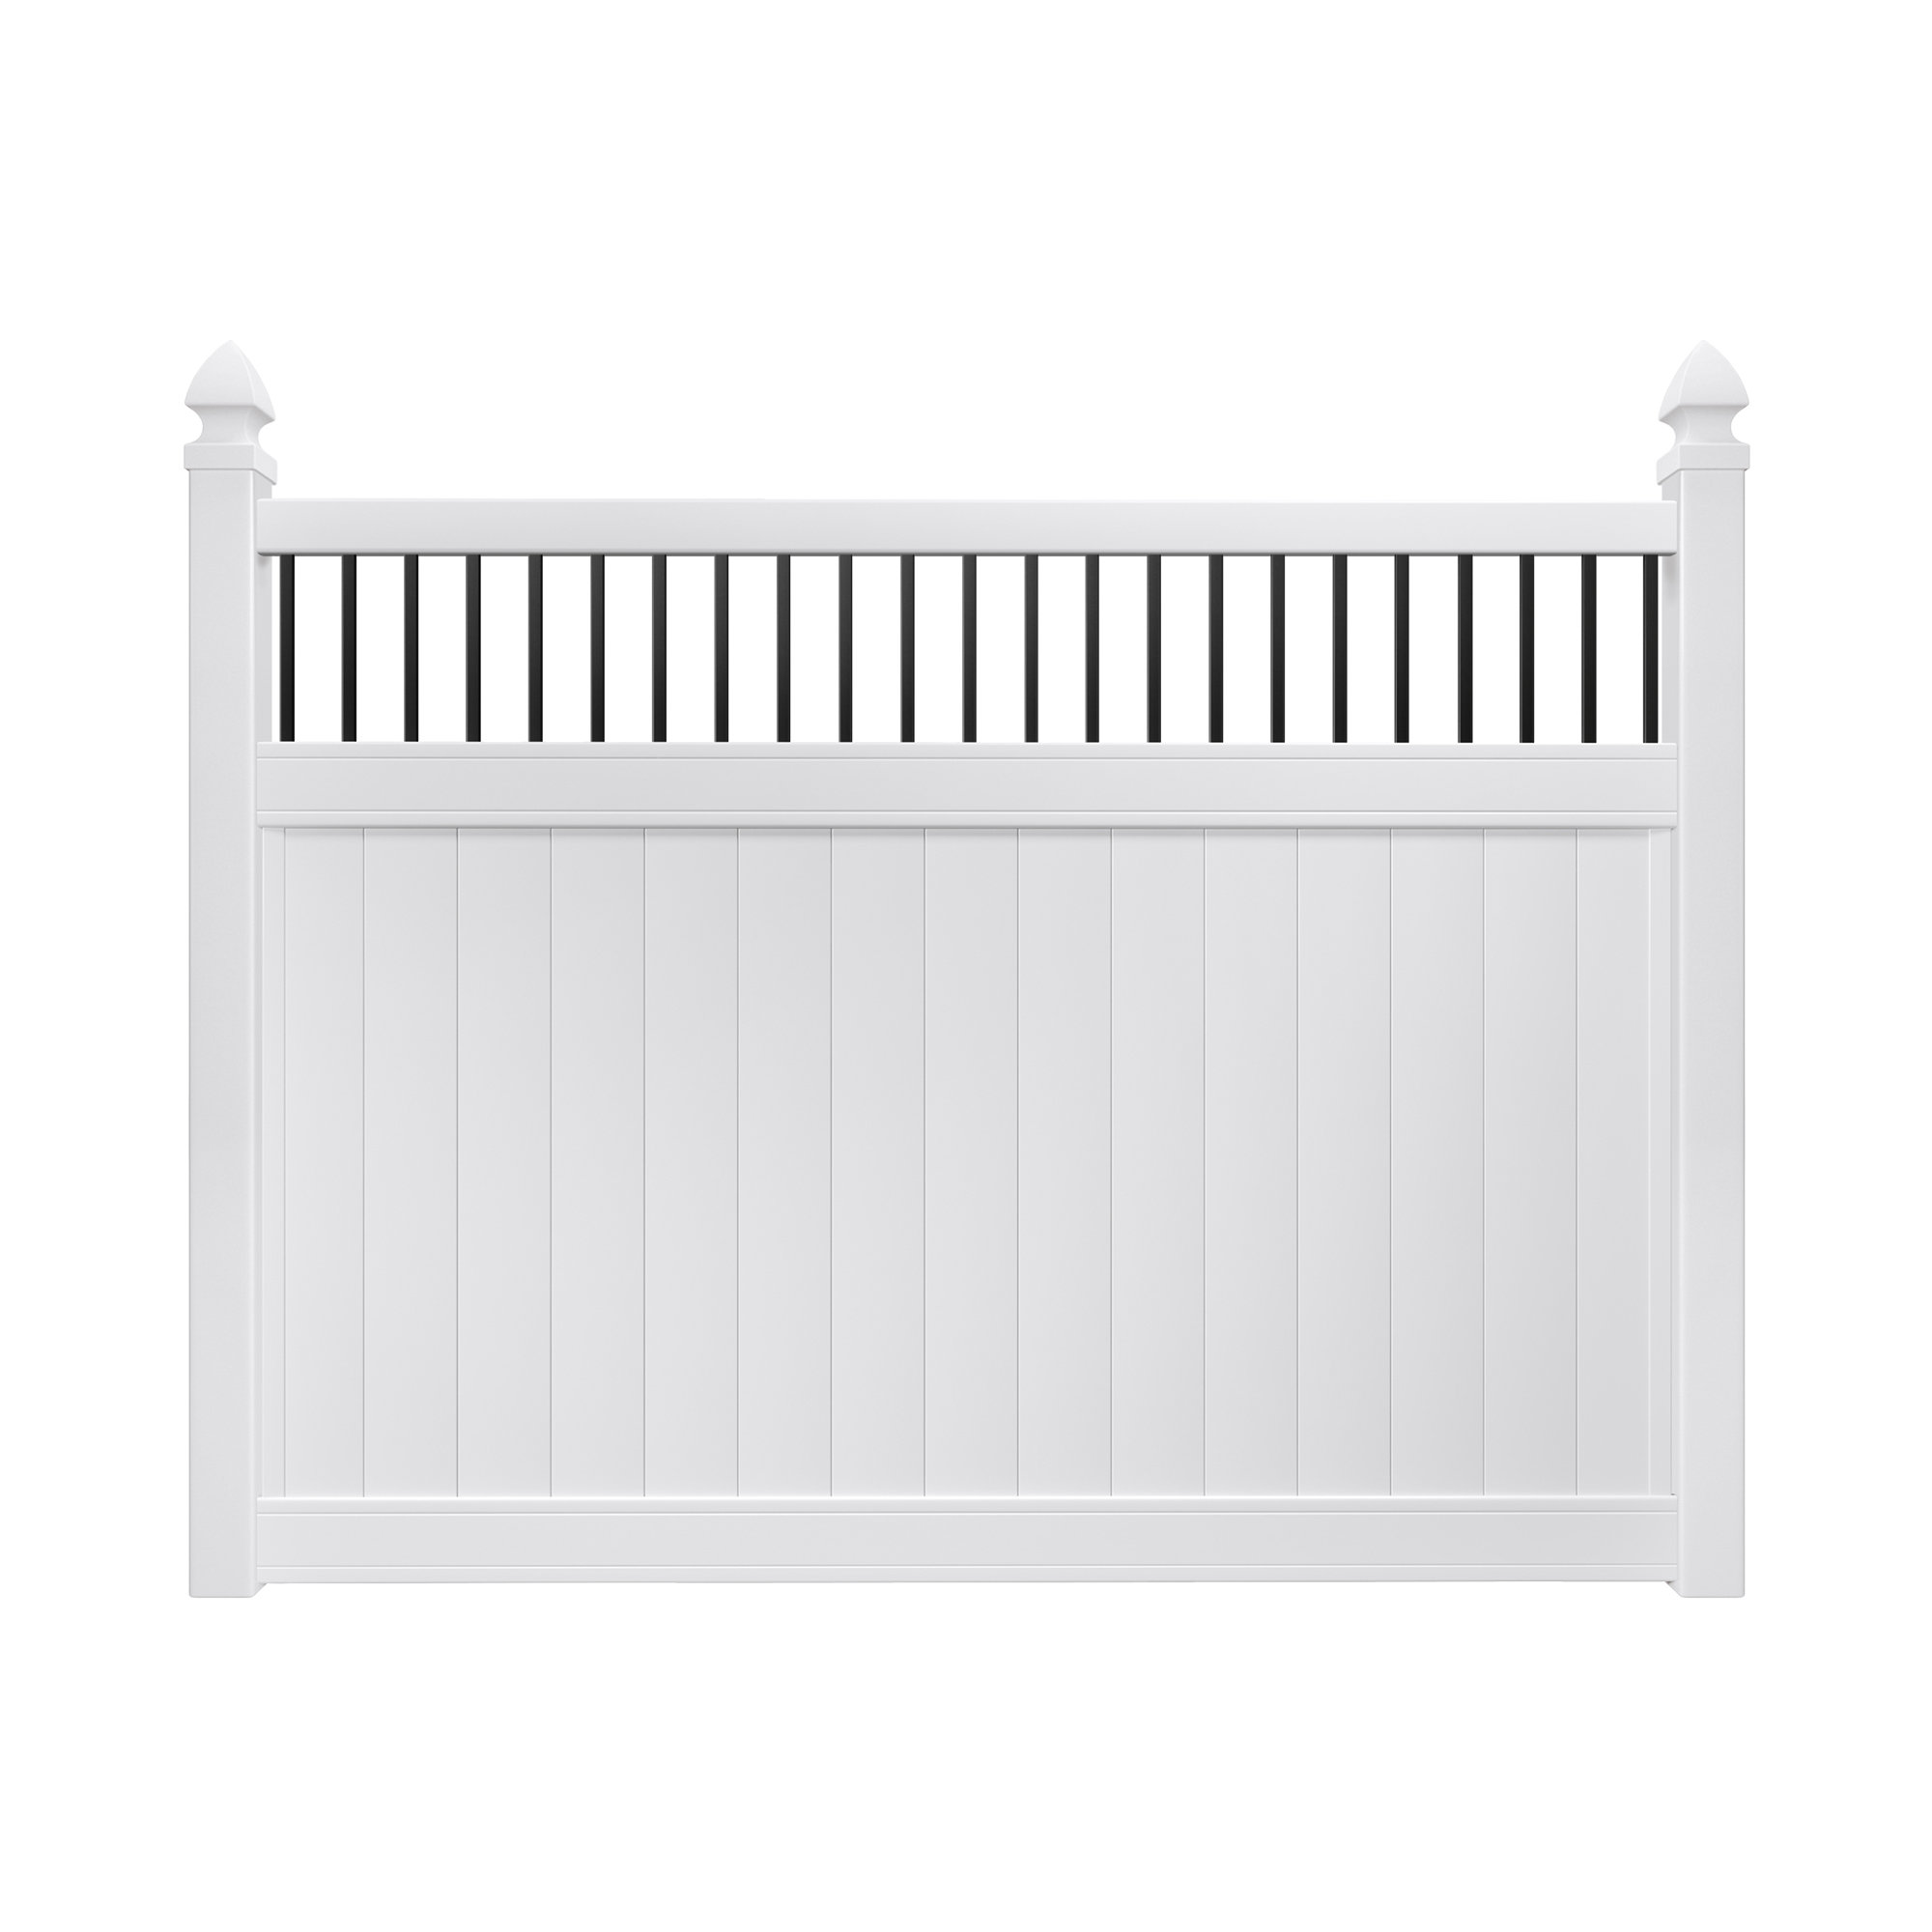 Outdoor Essentials Woodbridge Baluster Top White Vinyl Privacy Fence Panel and Reviews Wayfair